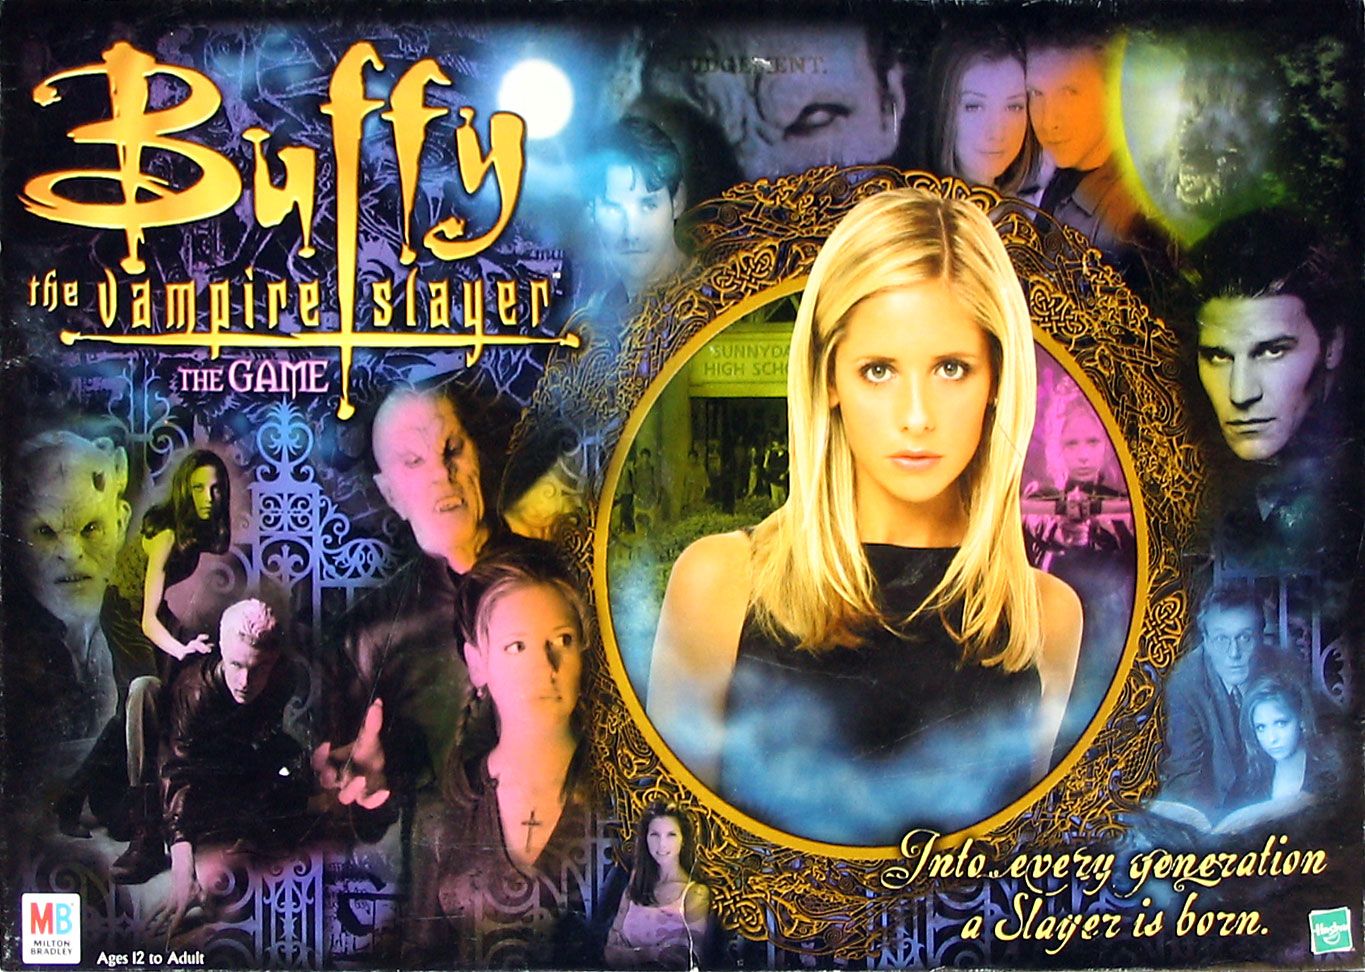 Buffy the Vampire Slayer: The Game